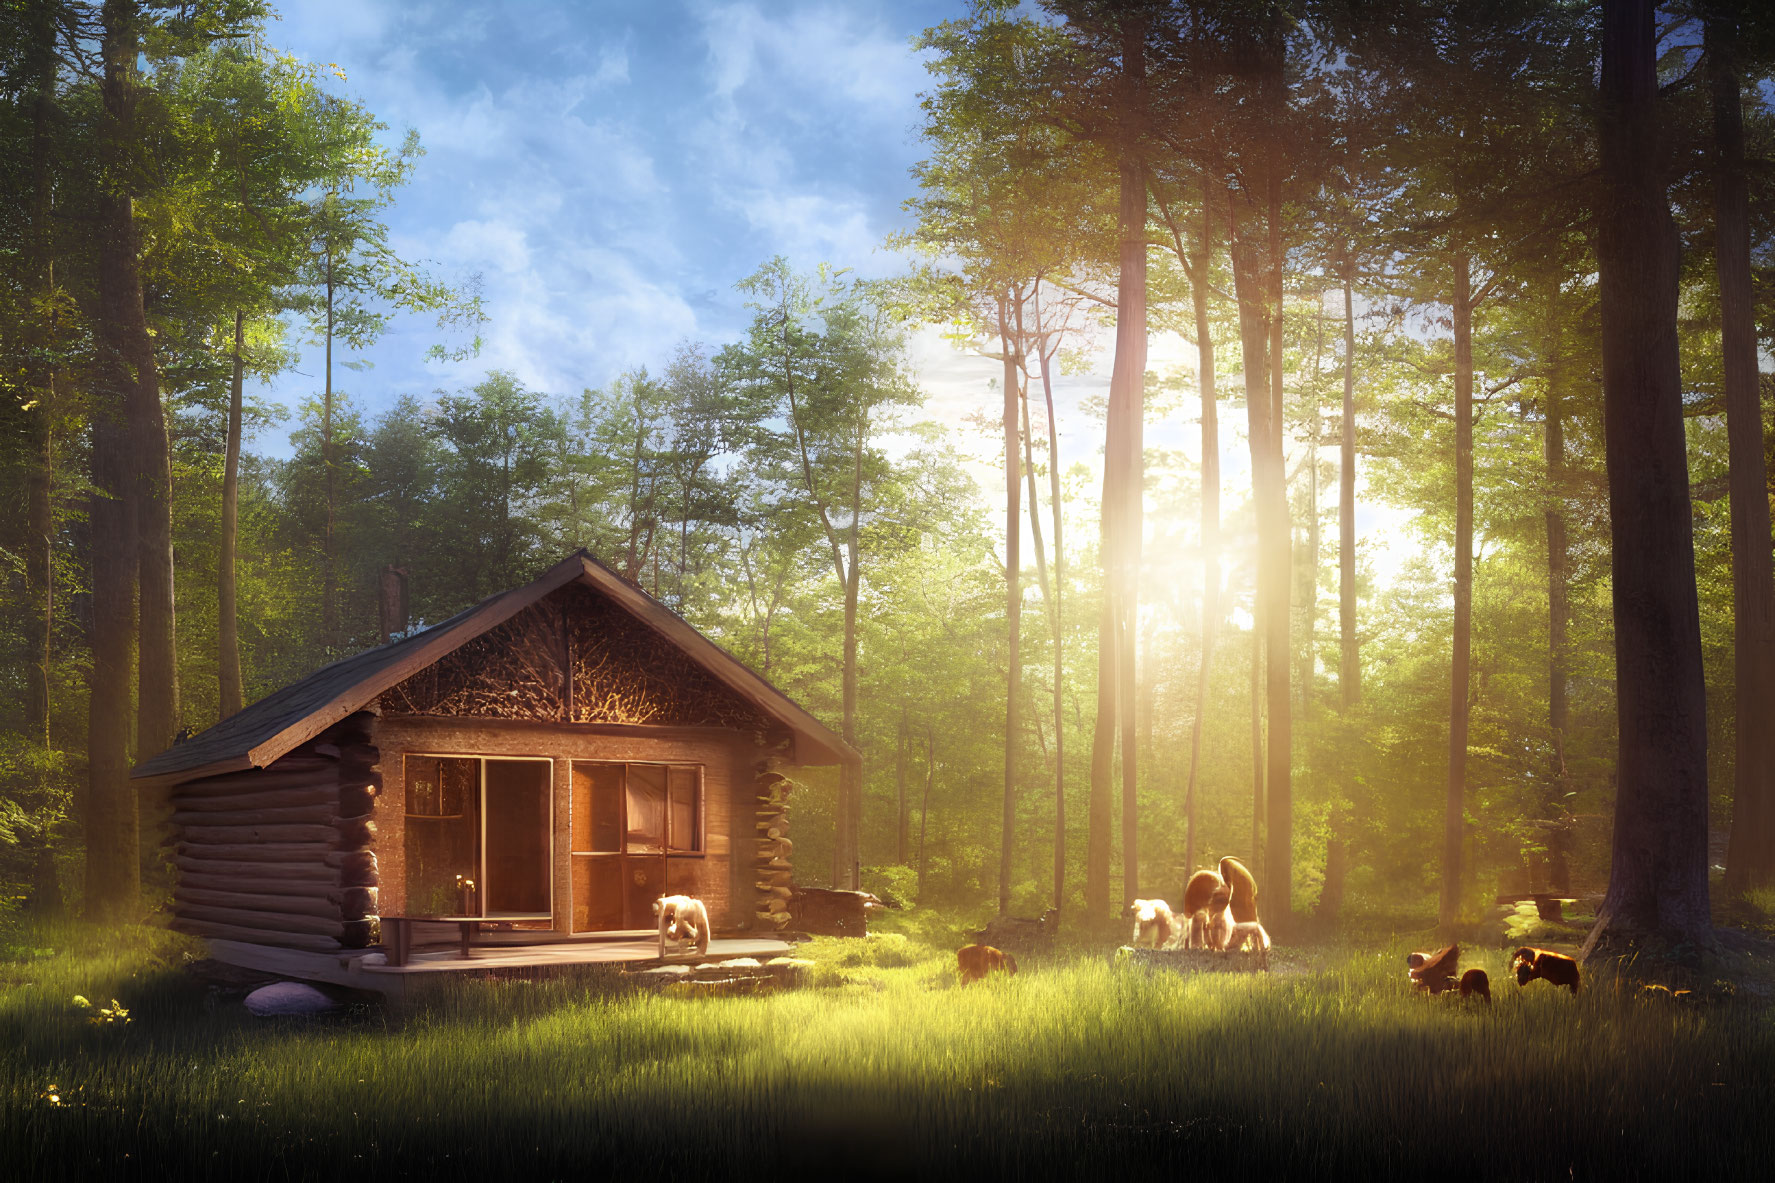 Tranquil woodland scene with log cabin, sunlight, woman, and dog